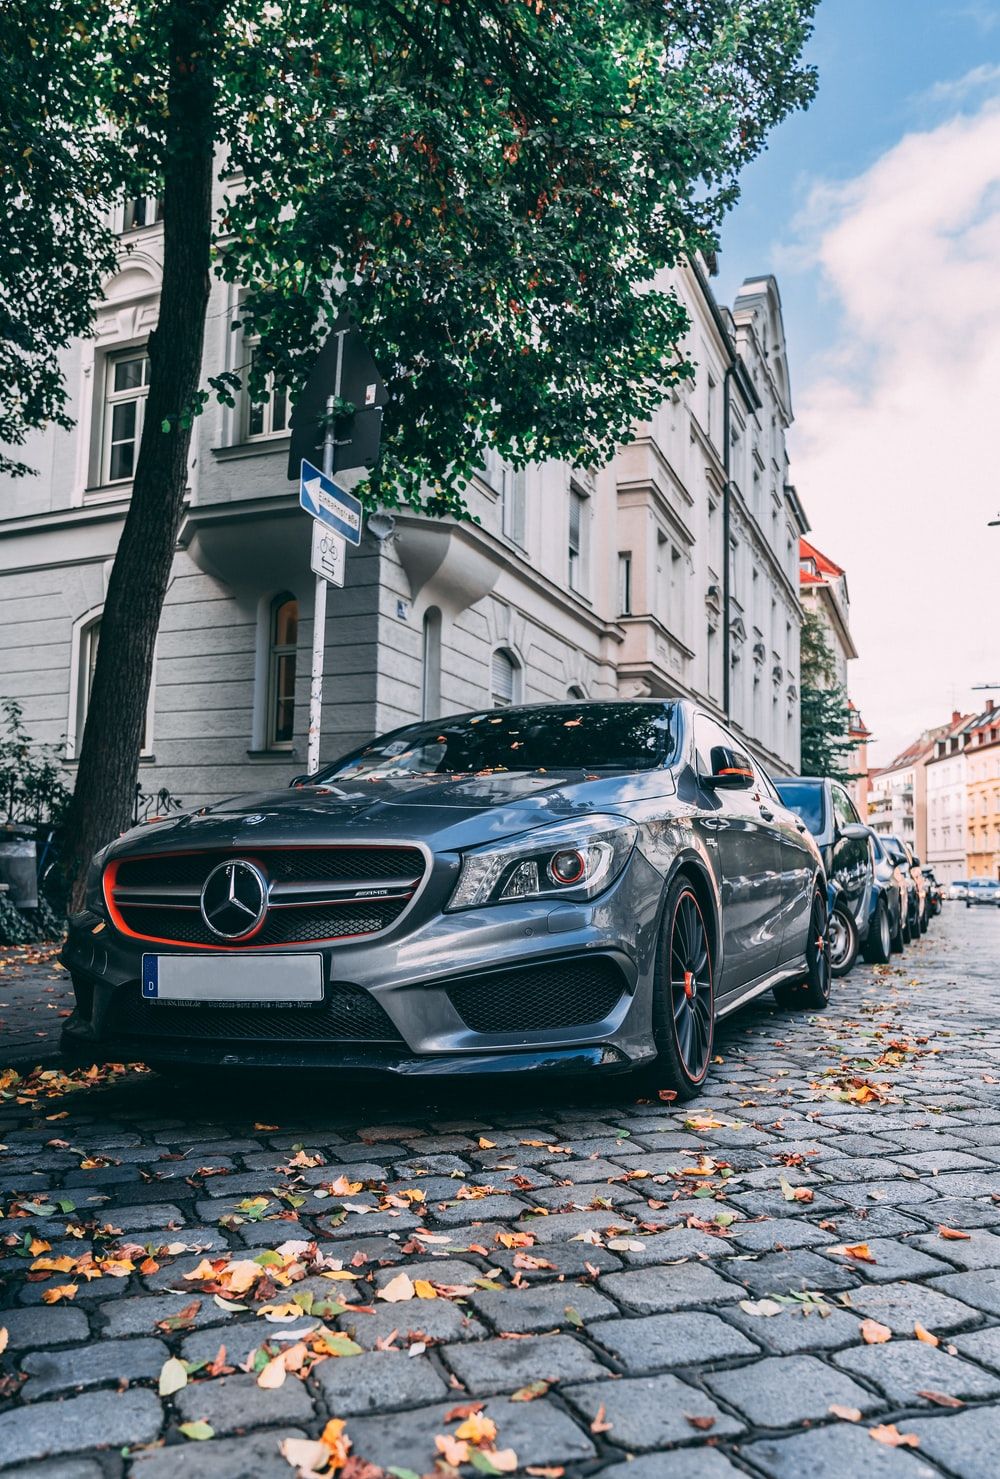 Mercedes Picture. Download Free Image